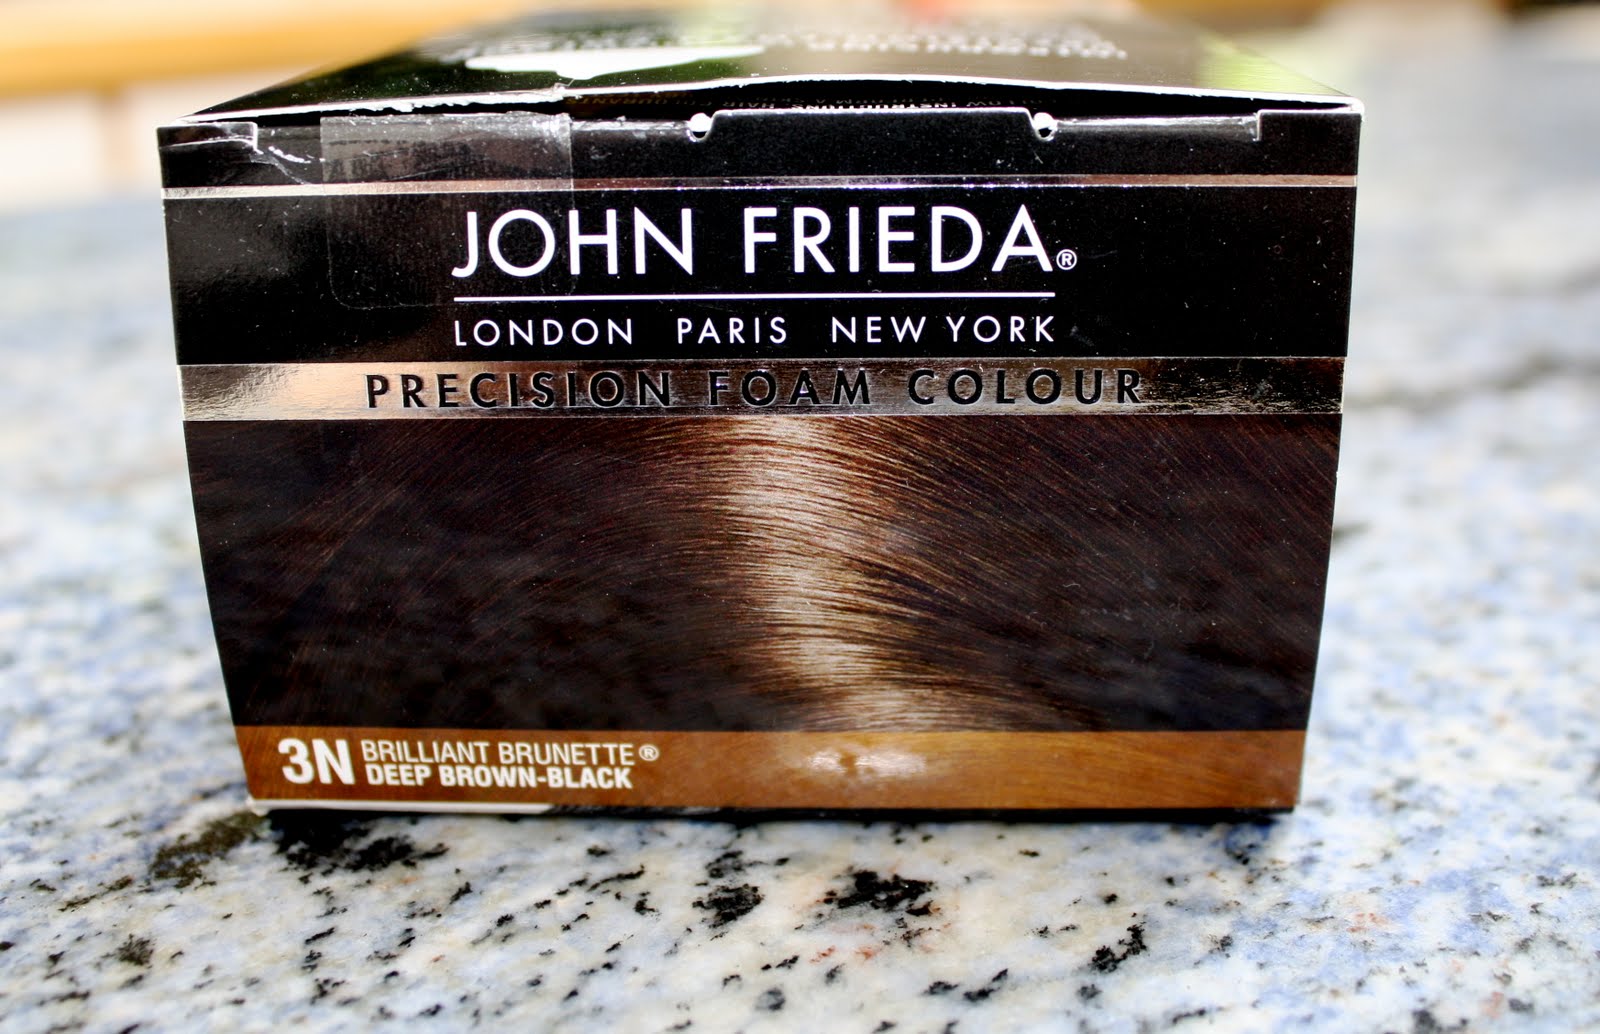 7. John Frieda Precision Foam Colour, Medium Natural Blonde 8N, Full-coverage Hair Color Kit, with Thick Foam for Deep Color Saturation - wide 10